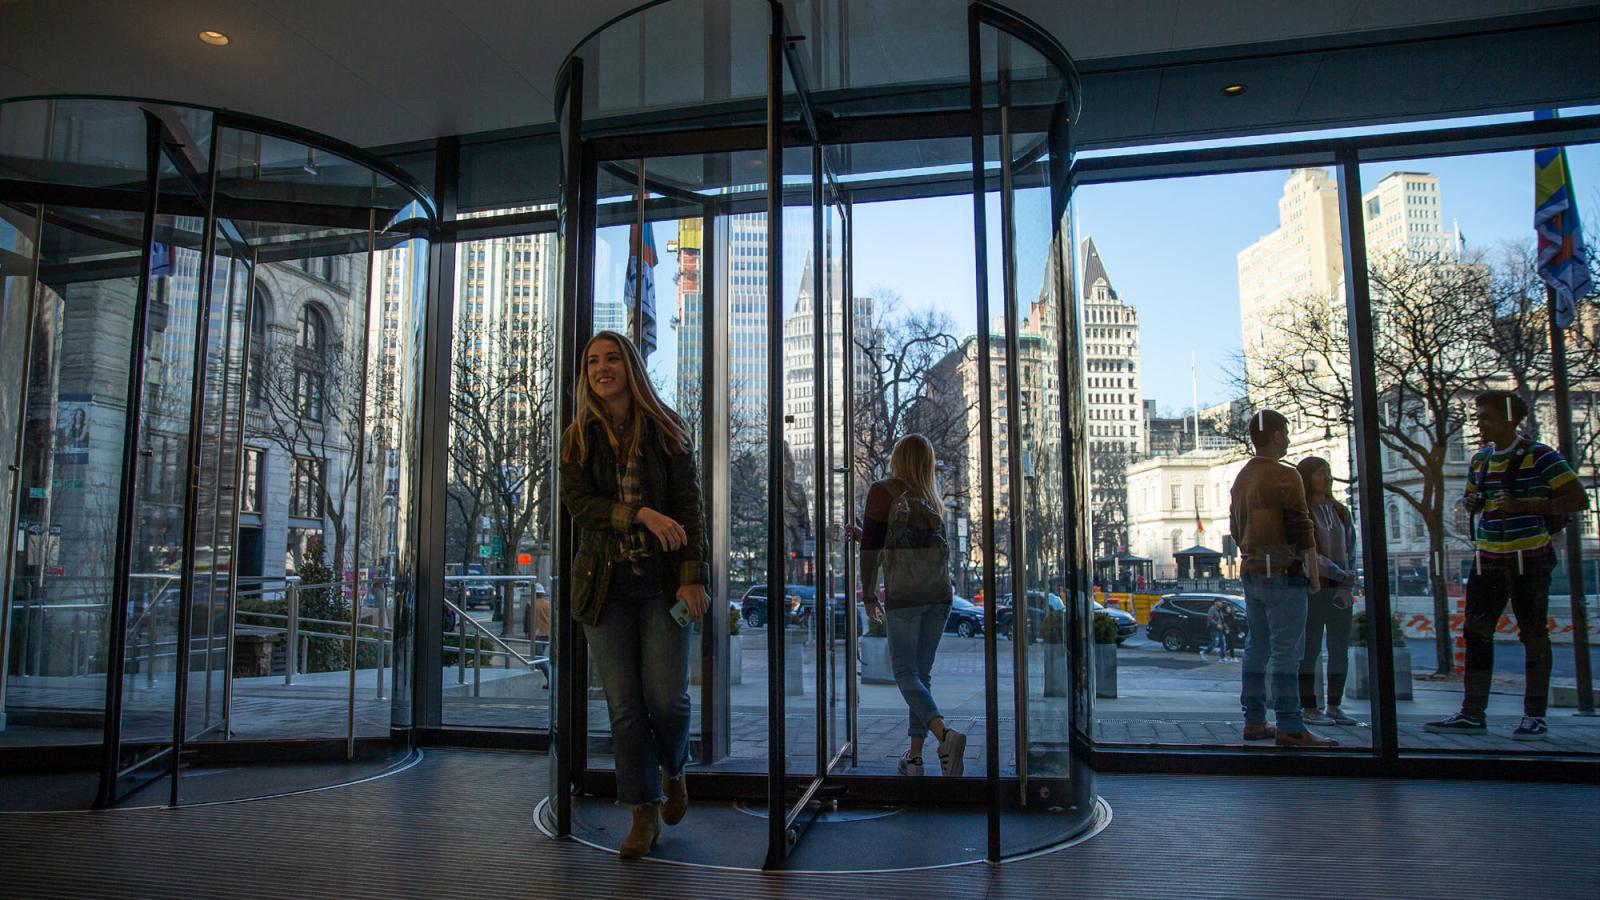 Pace students walking through revolving doors of One Pace Plaza at the New York City Campus